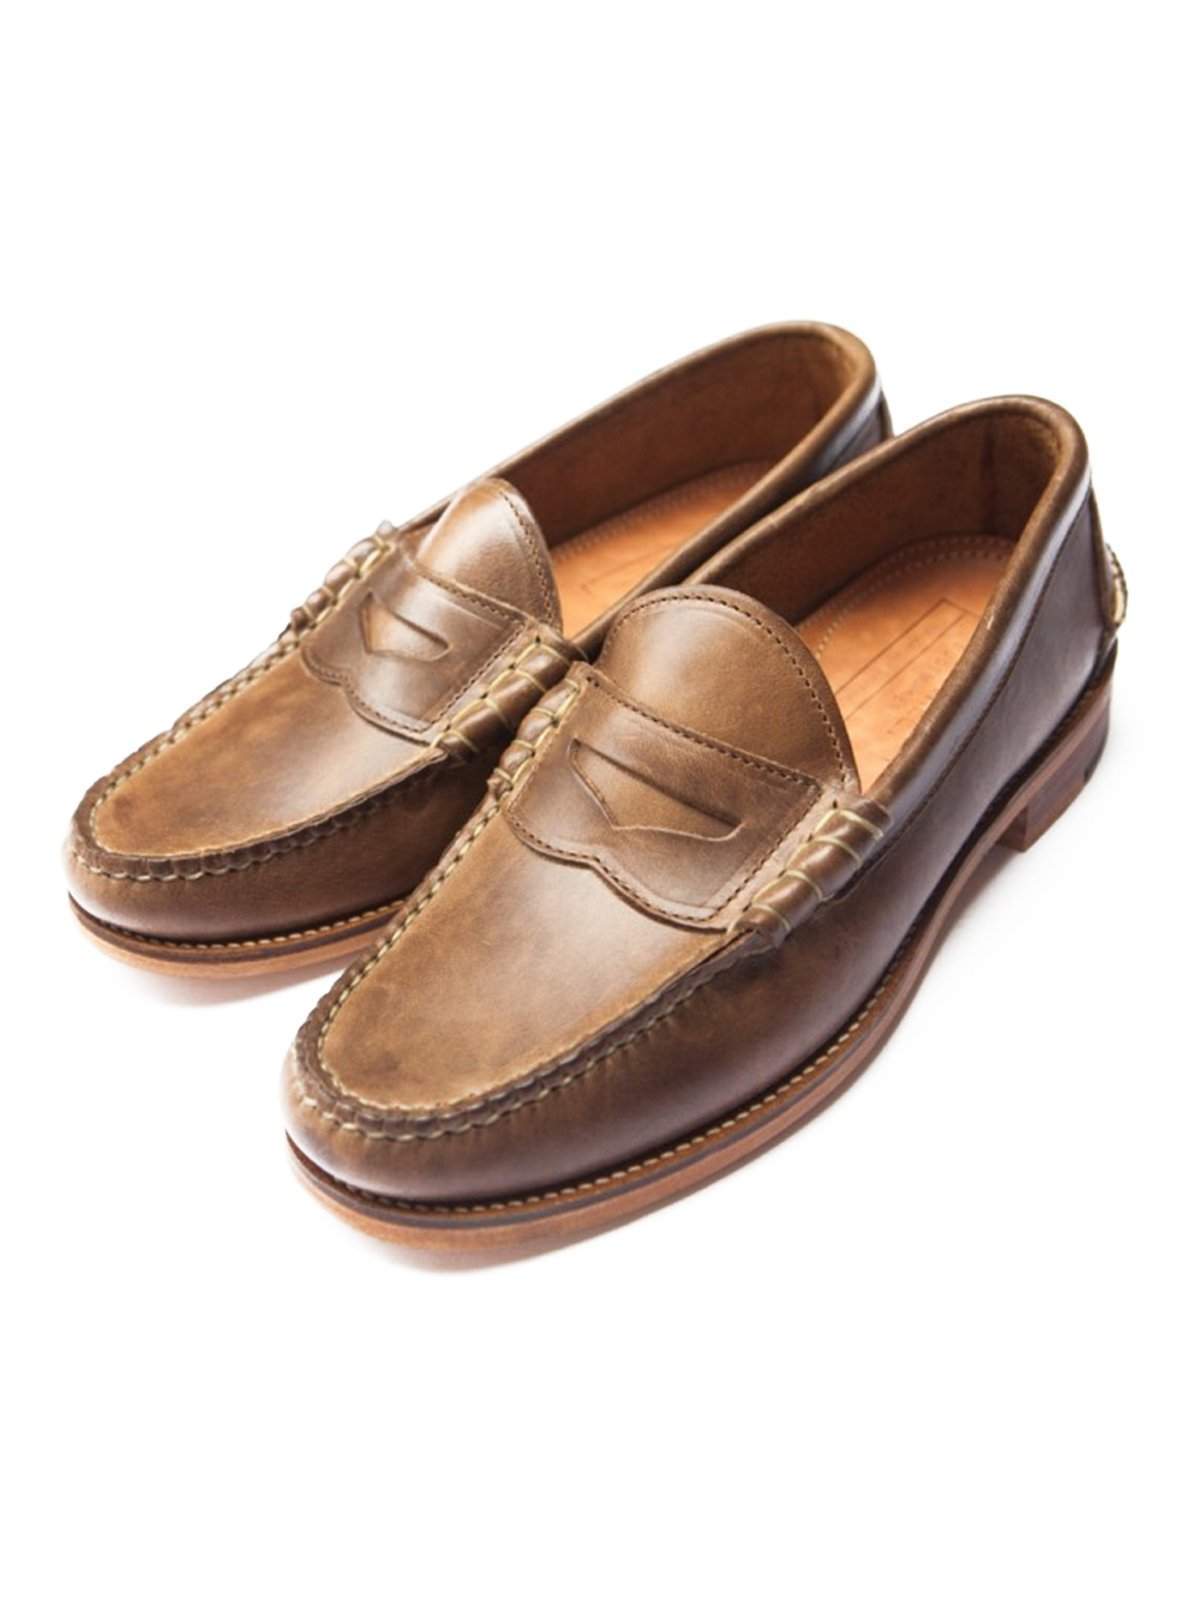 beefroll penny loafer